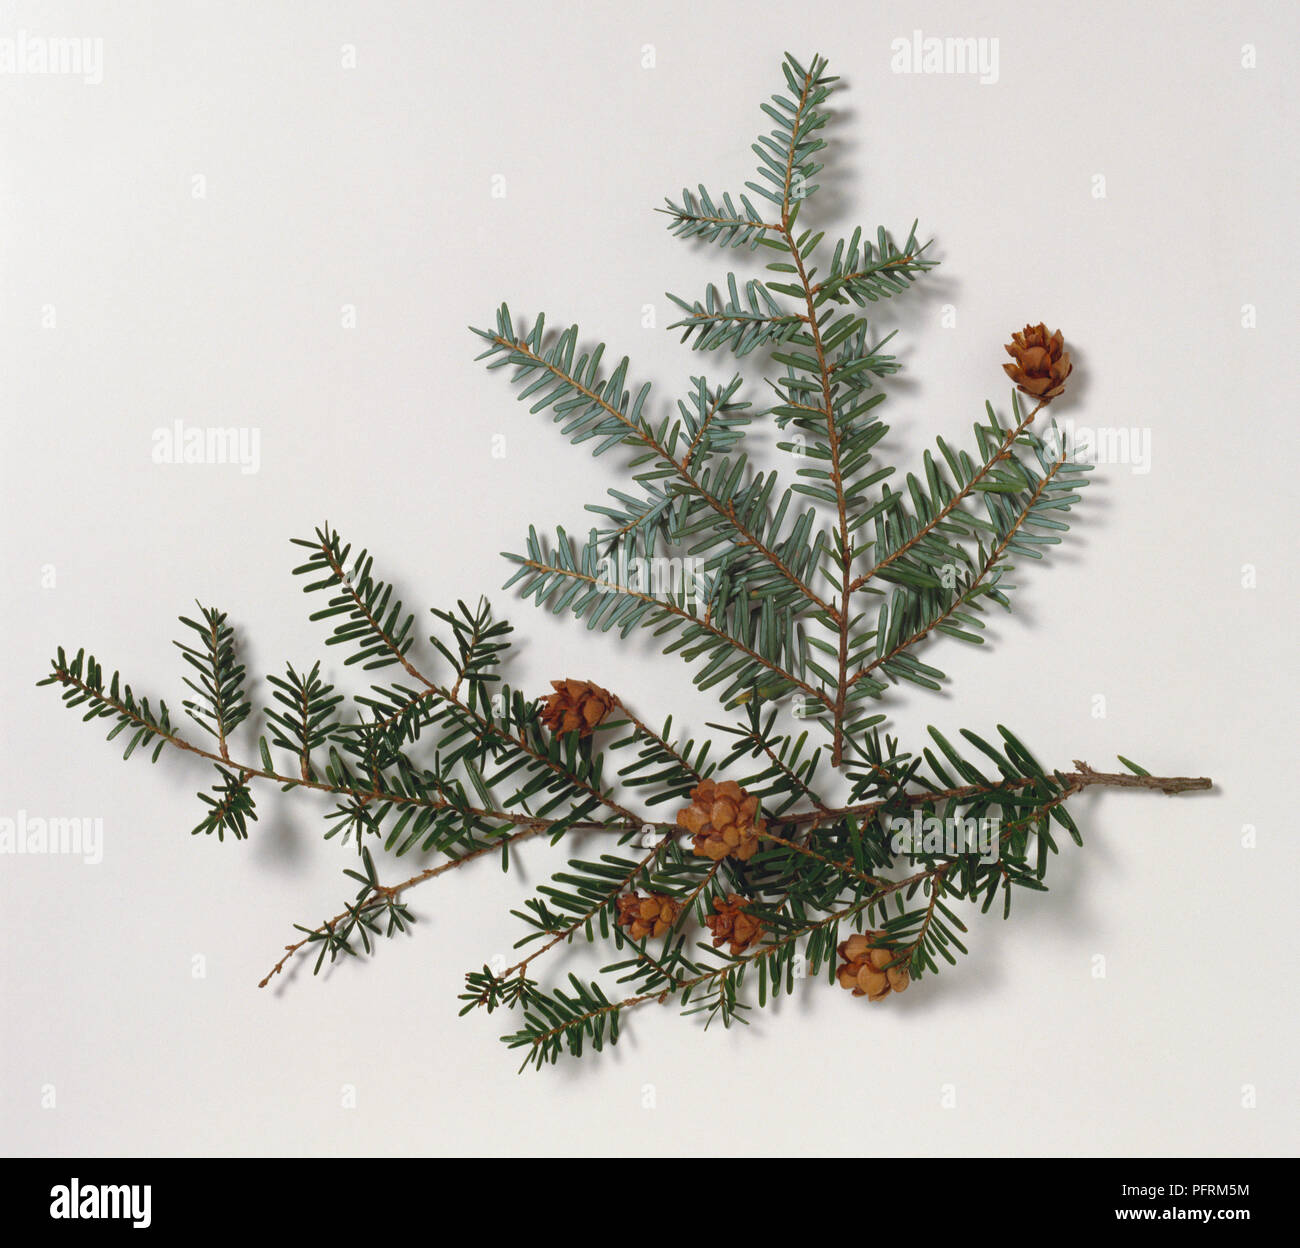 Tsuga heterophylla (Western hemlock), stems with leaves and cones, also showing underside of leaves Stock Photo